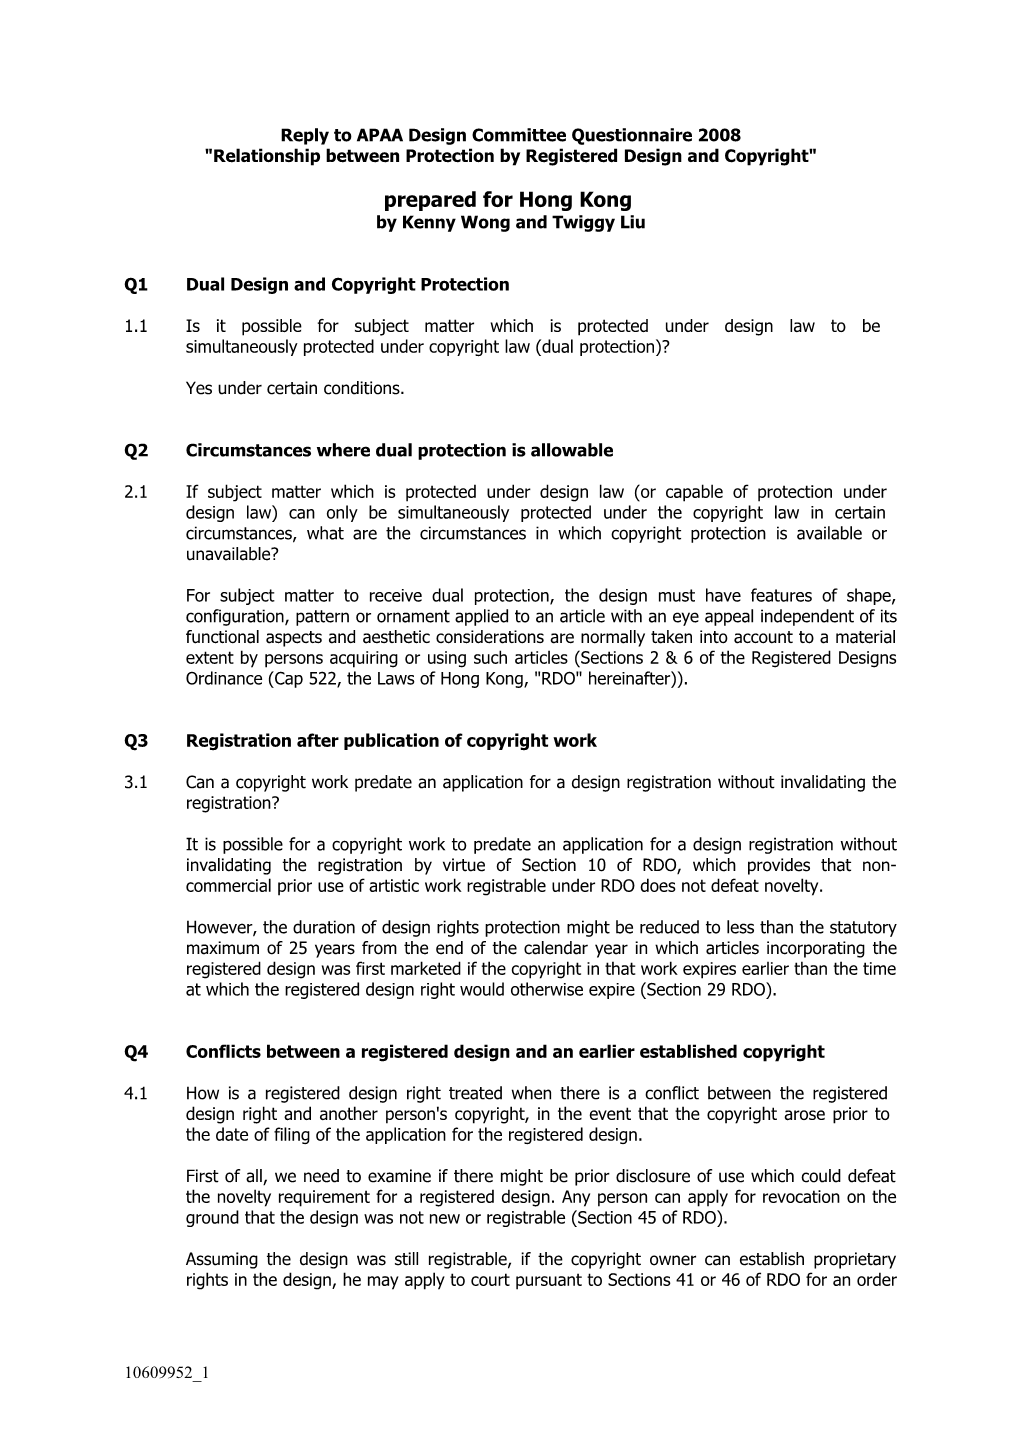 Reply to APAA Design Committee Questionnaire 2008